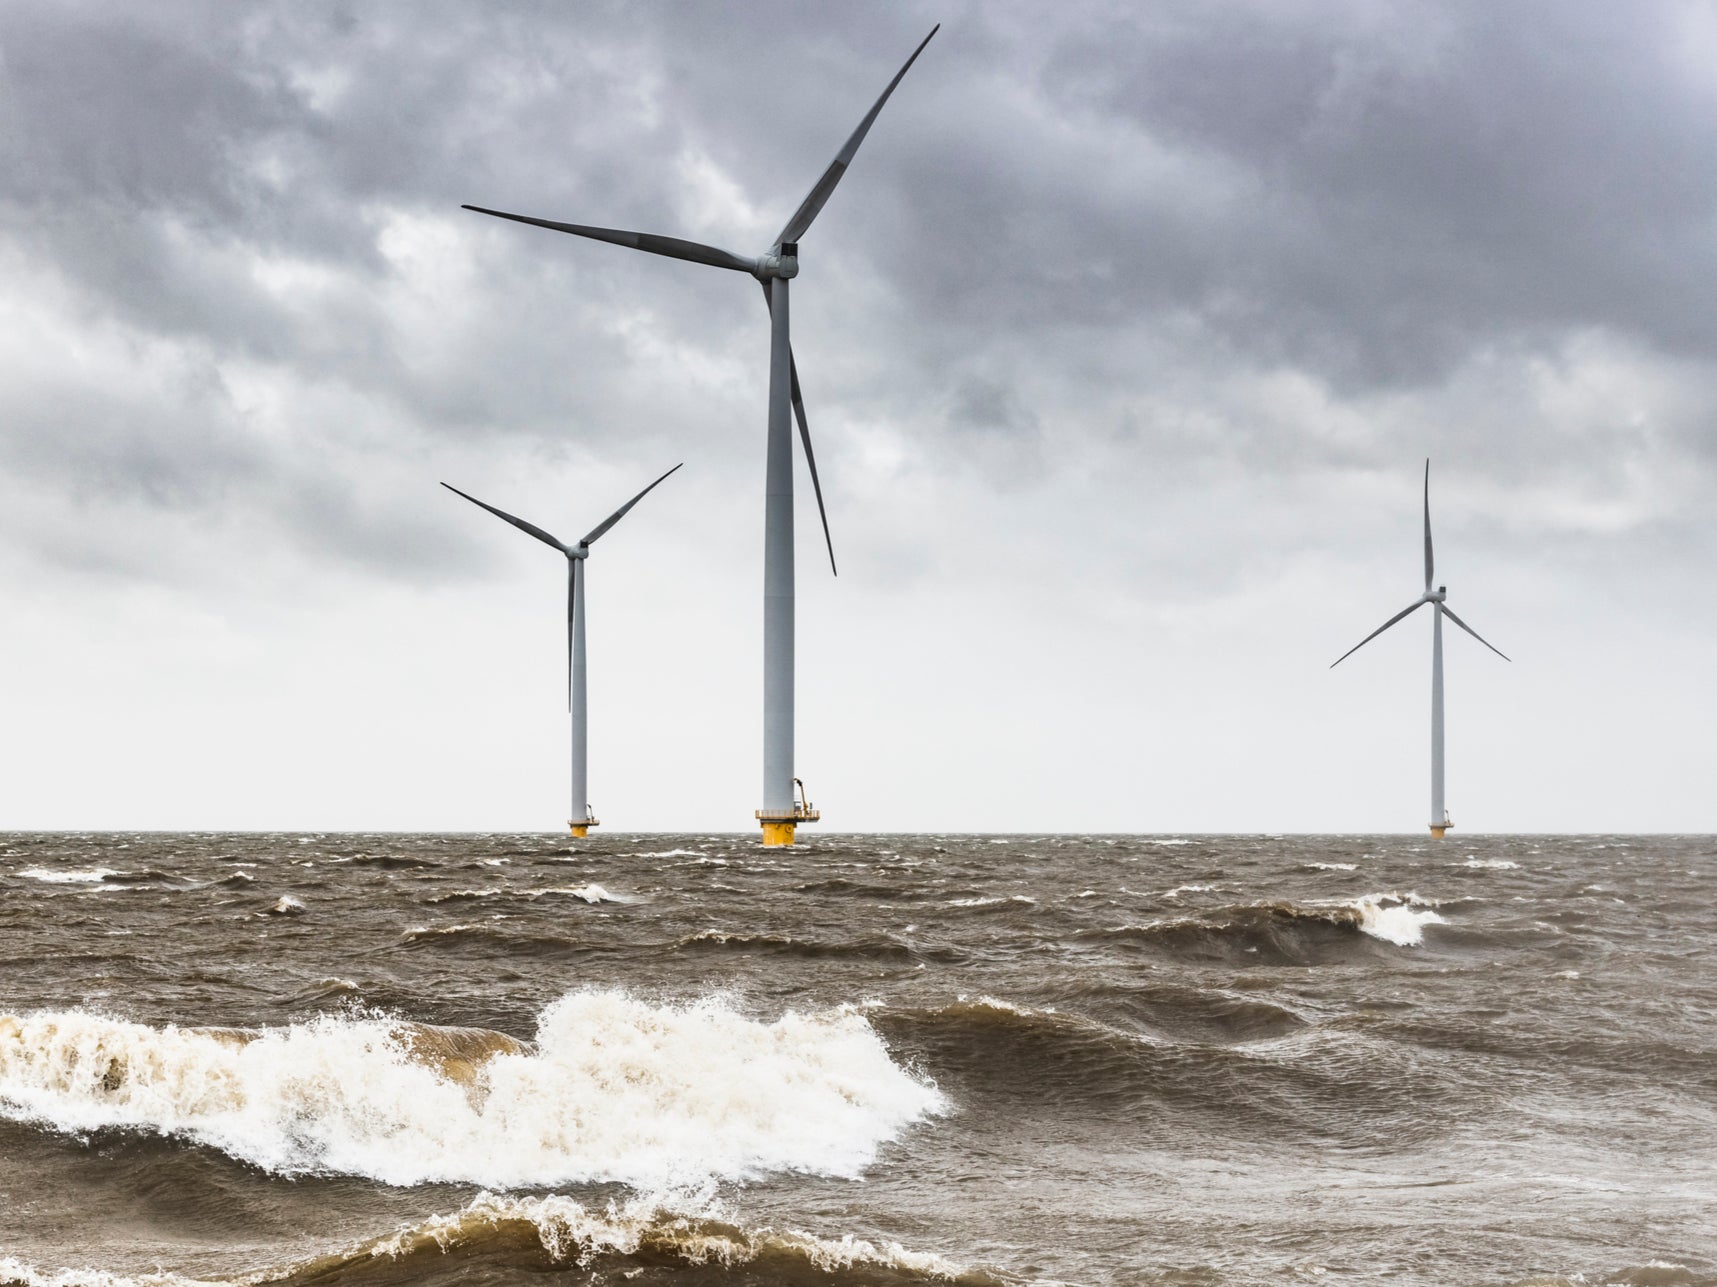 Storms and windy weather helped set new renewable energy records over 2020